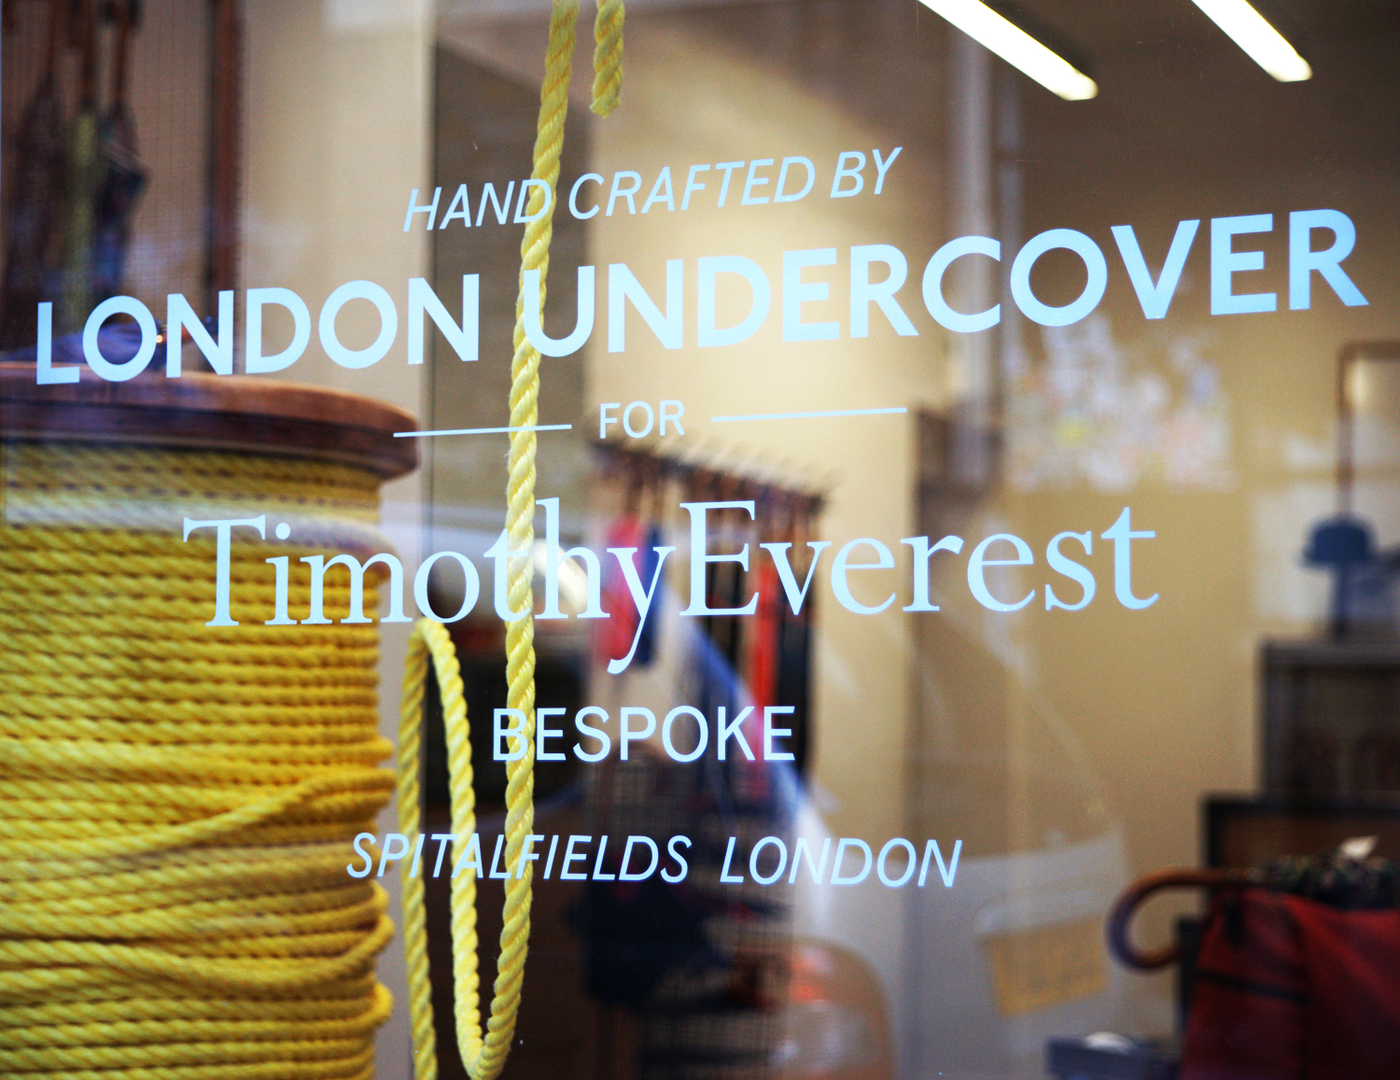 London Undercover for Timothy Everest